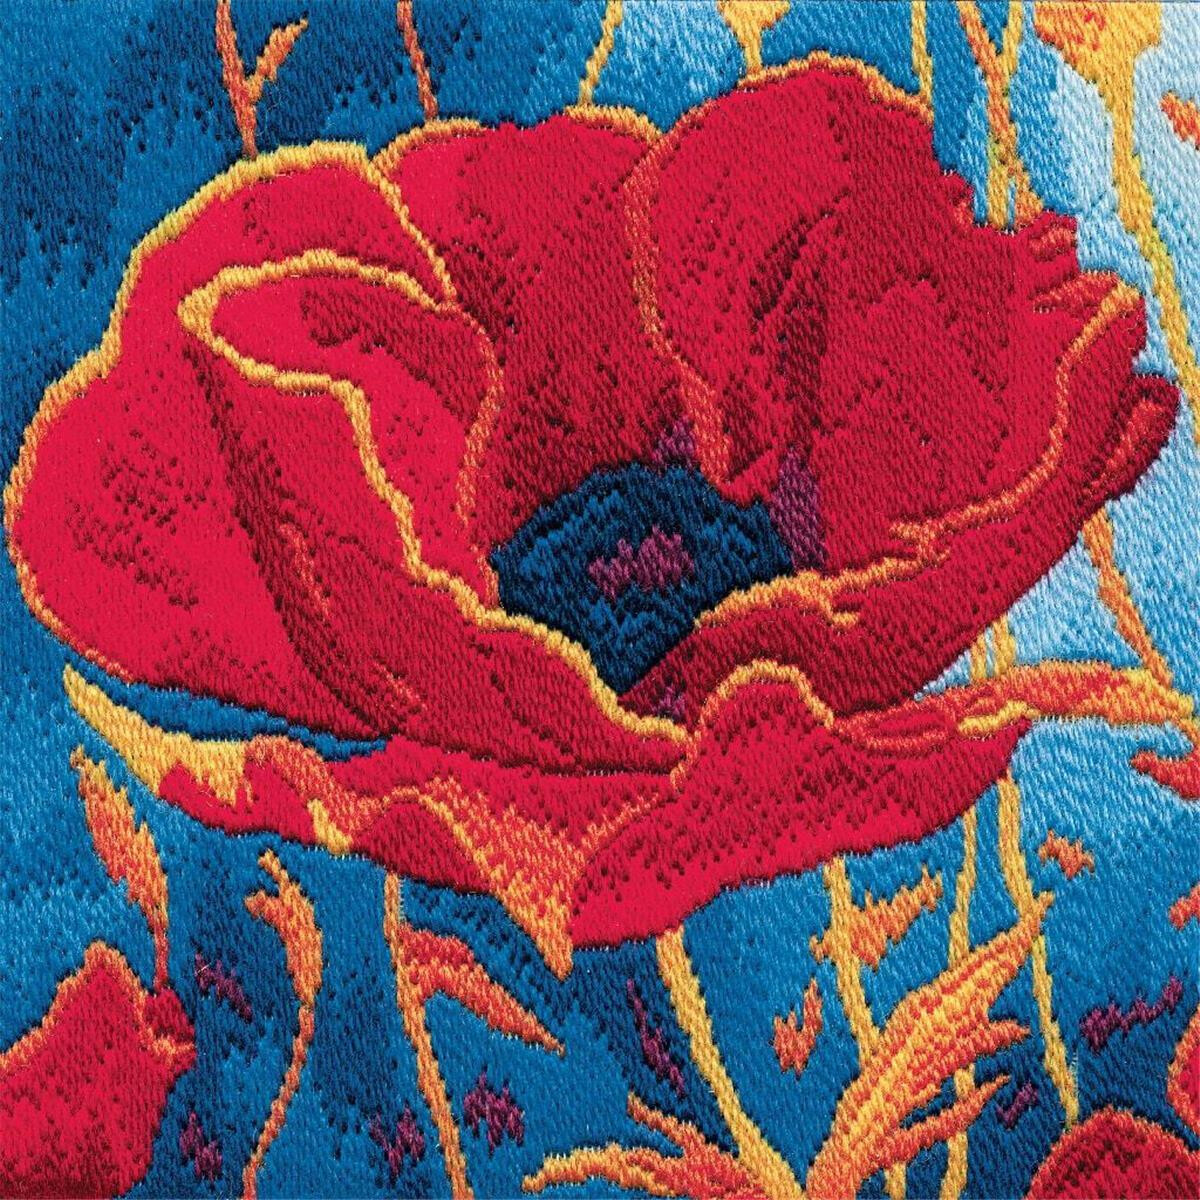 A colorful close-up of an embroidered red poppy with...